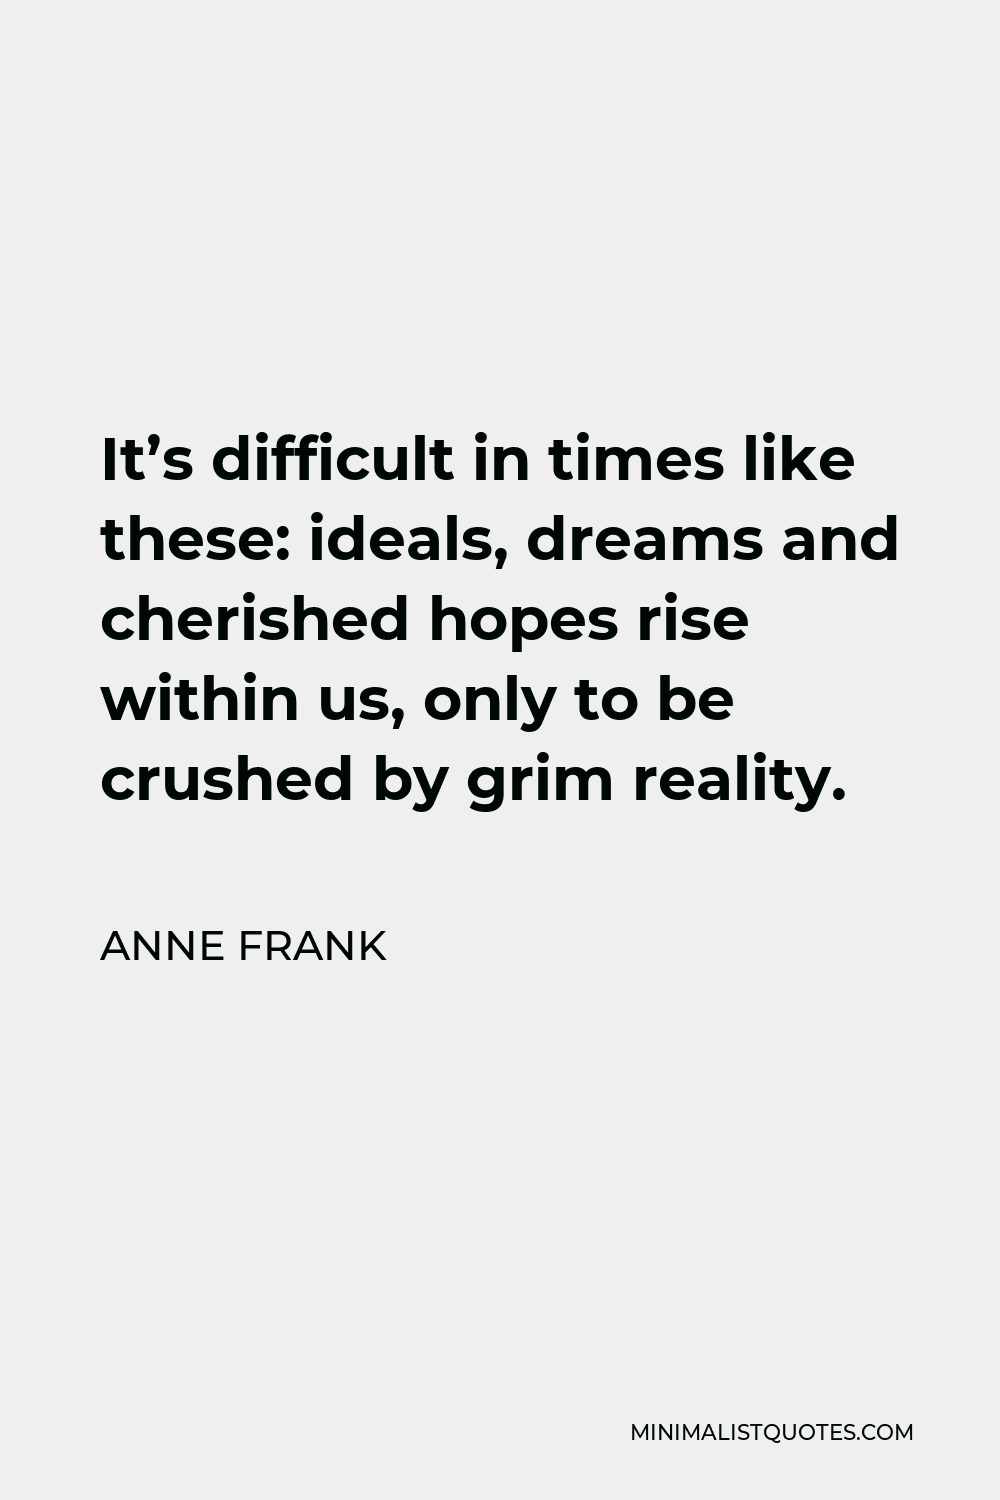 Anne Frank Quote - It’s difficult in times like these: ideals, dreams and cherished hopes rise within us, only to be crushed by grim reality.